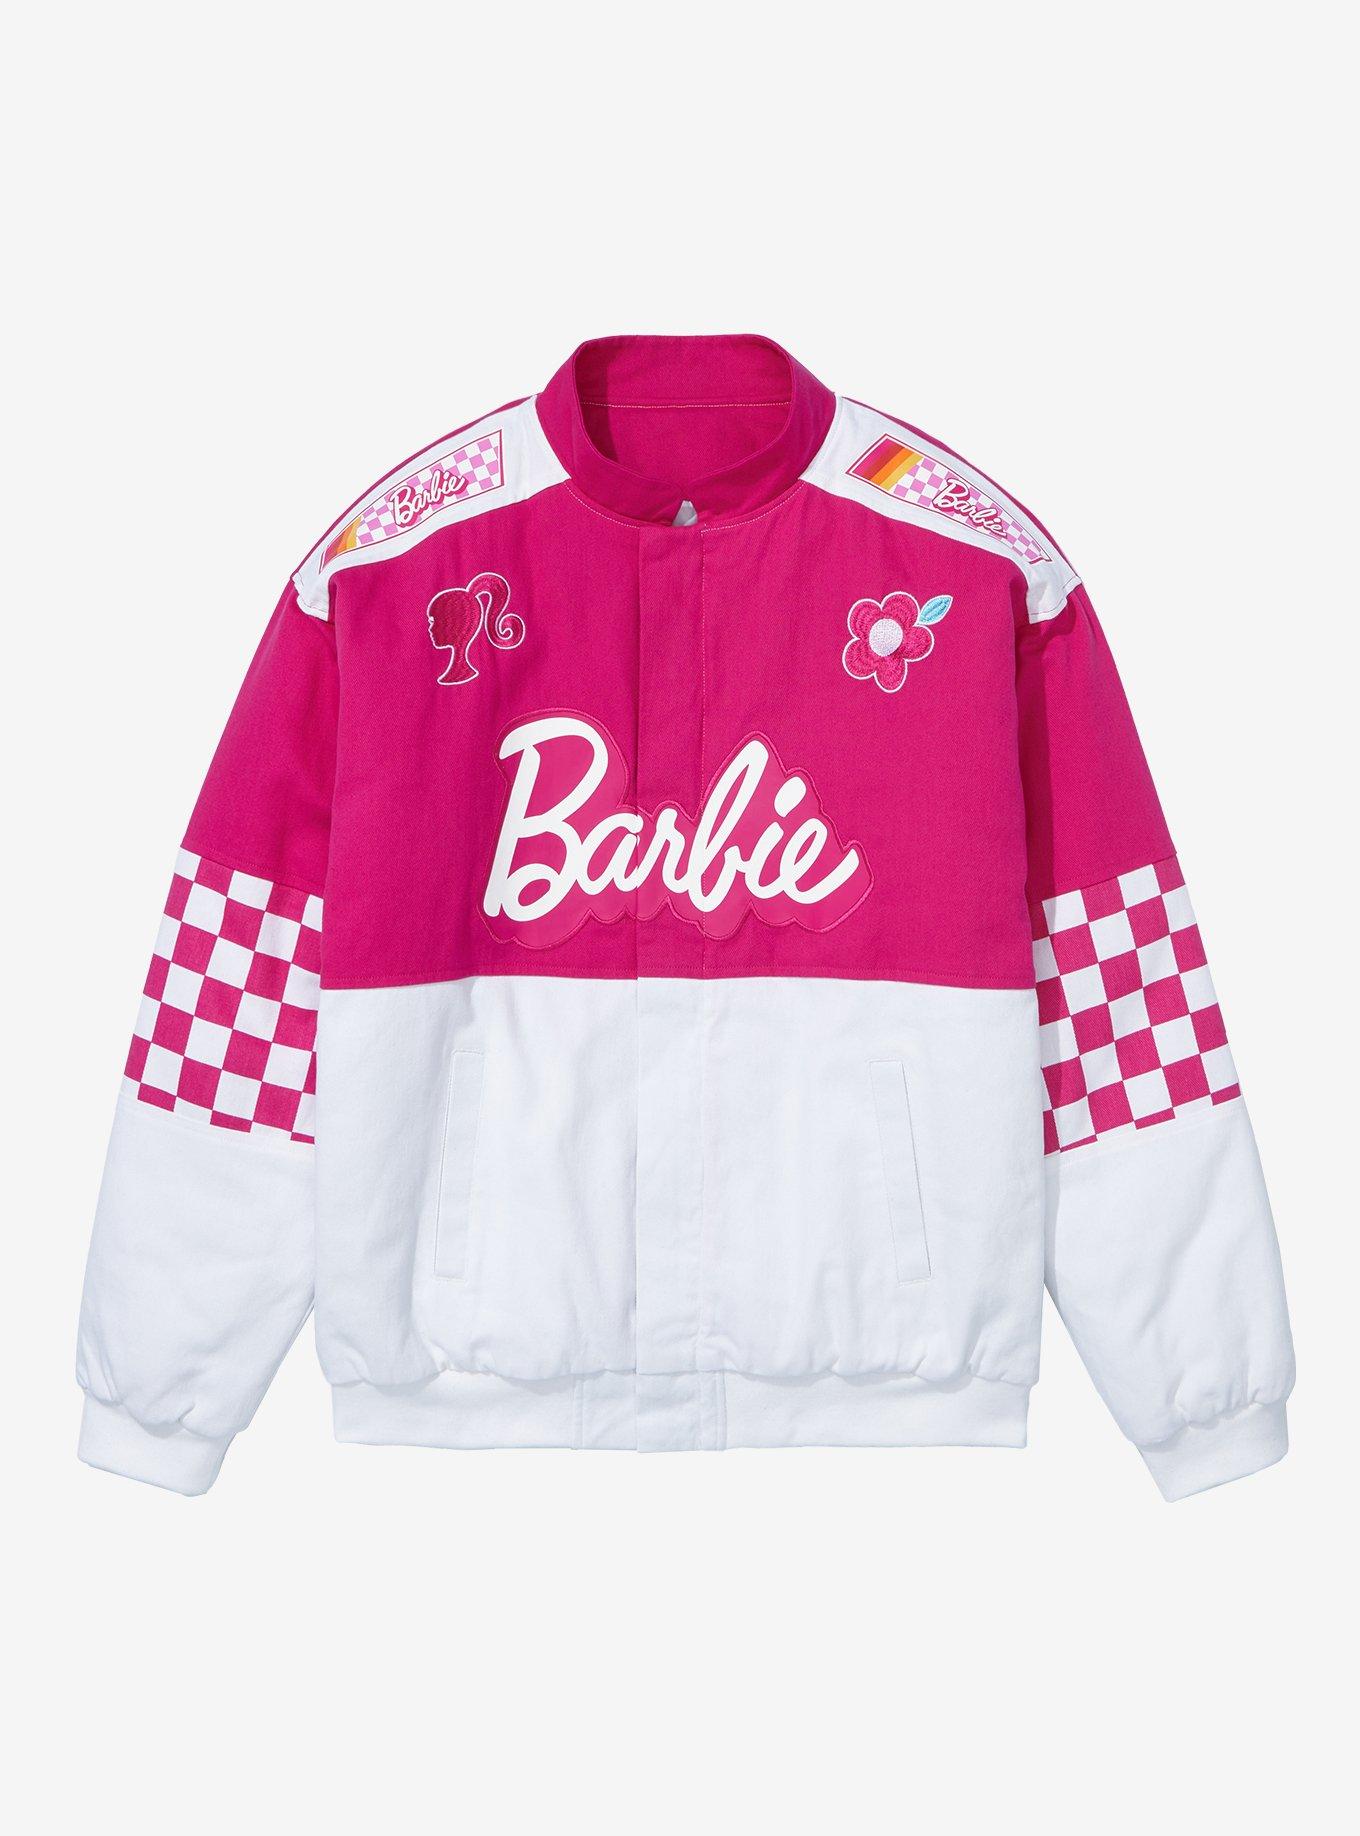 Outdoor gear in Barbie pink, inspired by the Barbie movie - Reviewed